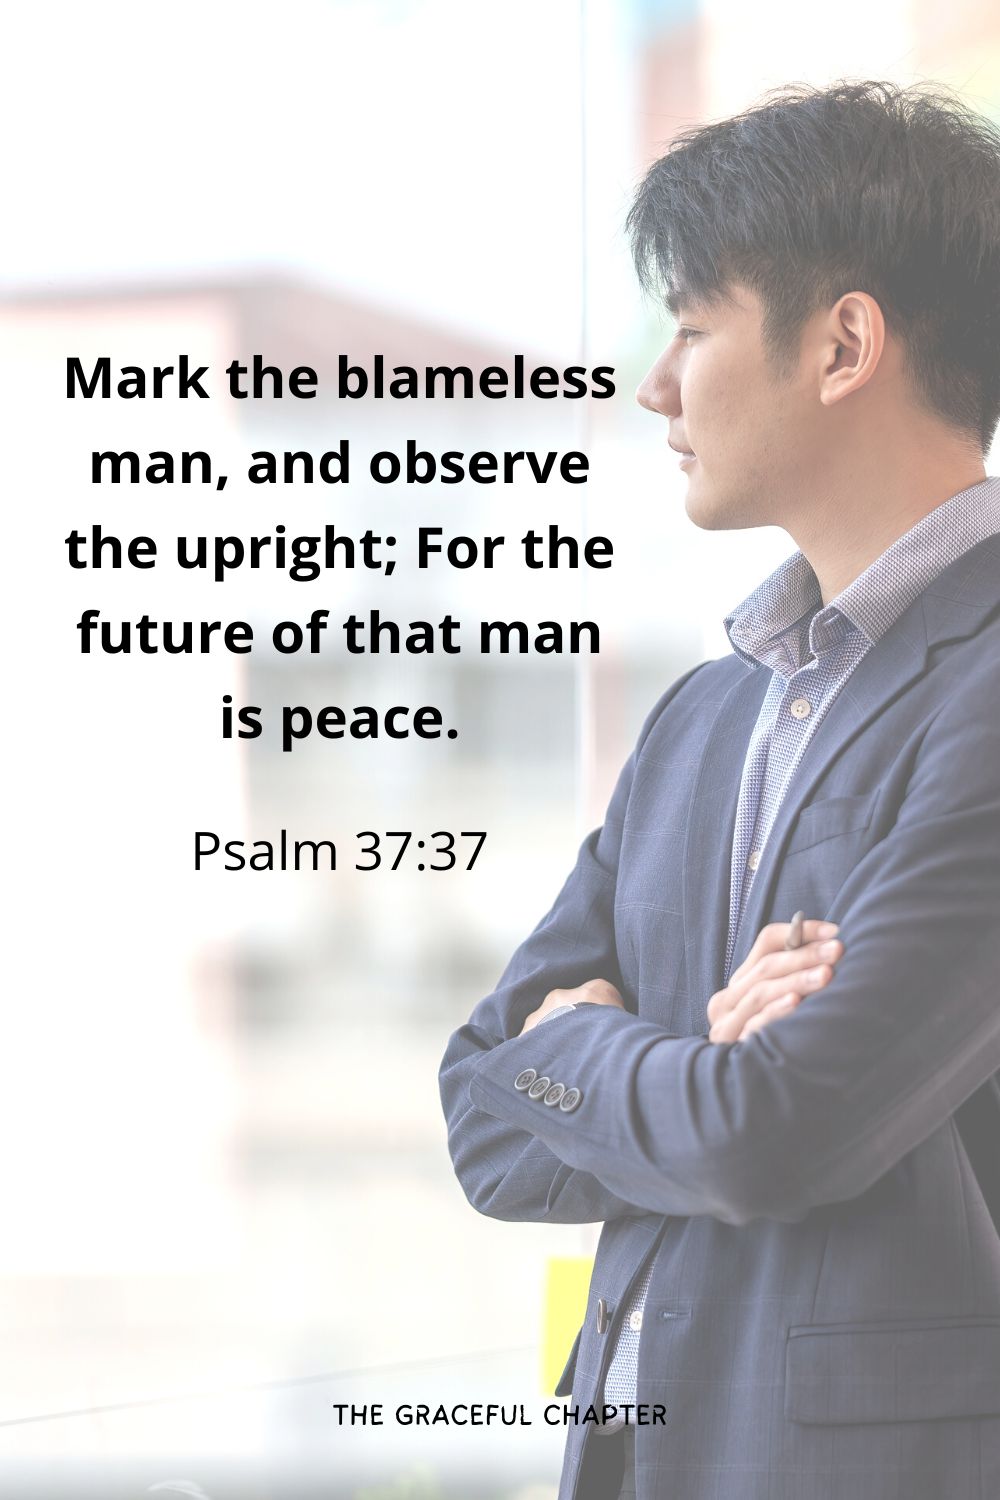 Mark the blameless man, and observe the upright; For the future of that man is peace.